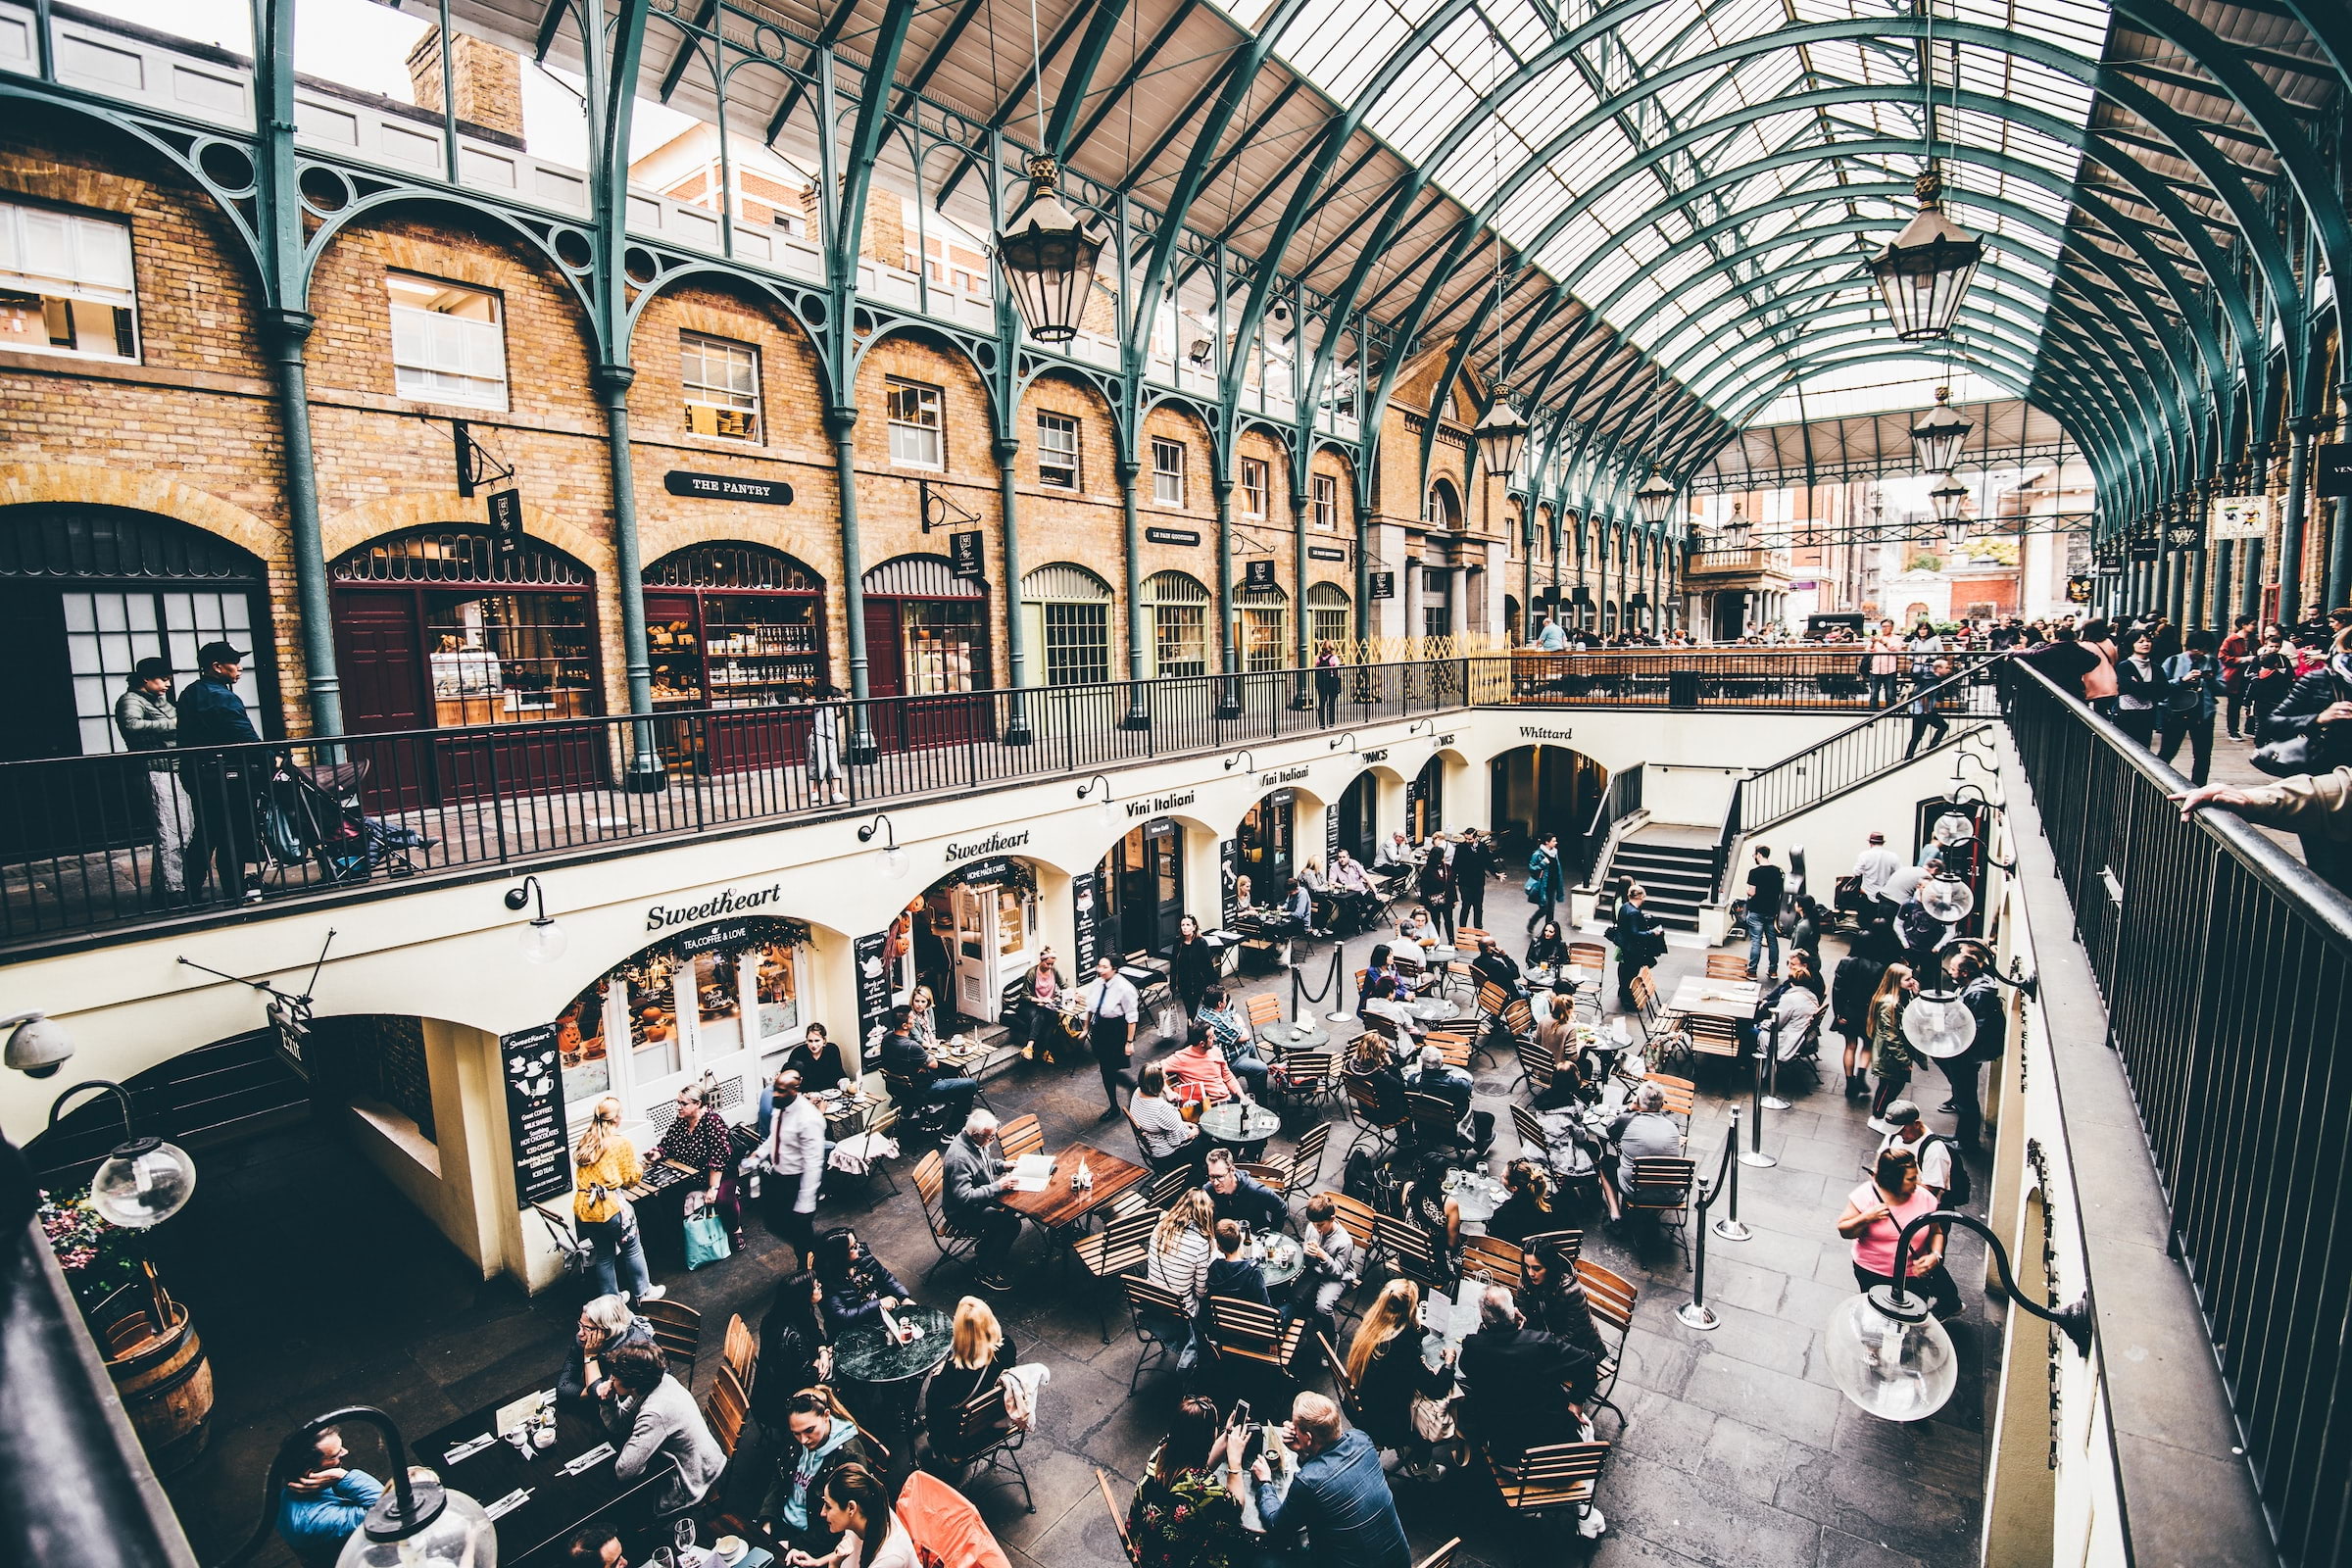 How to spend a day in Covent Garden